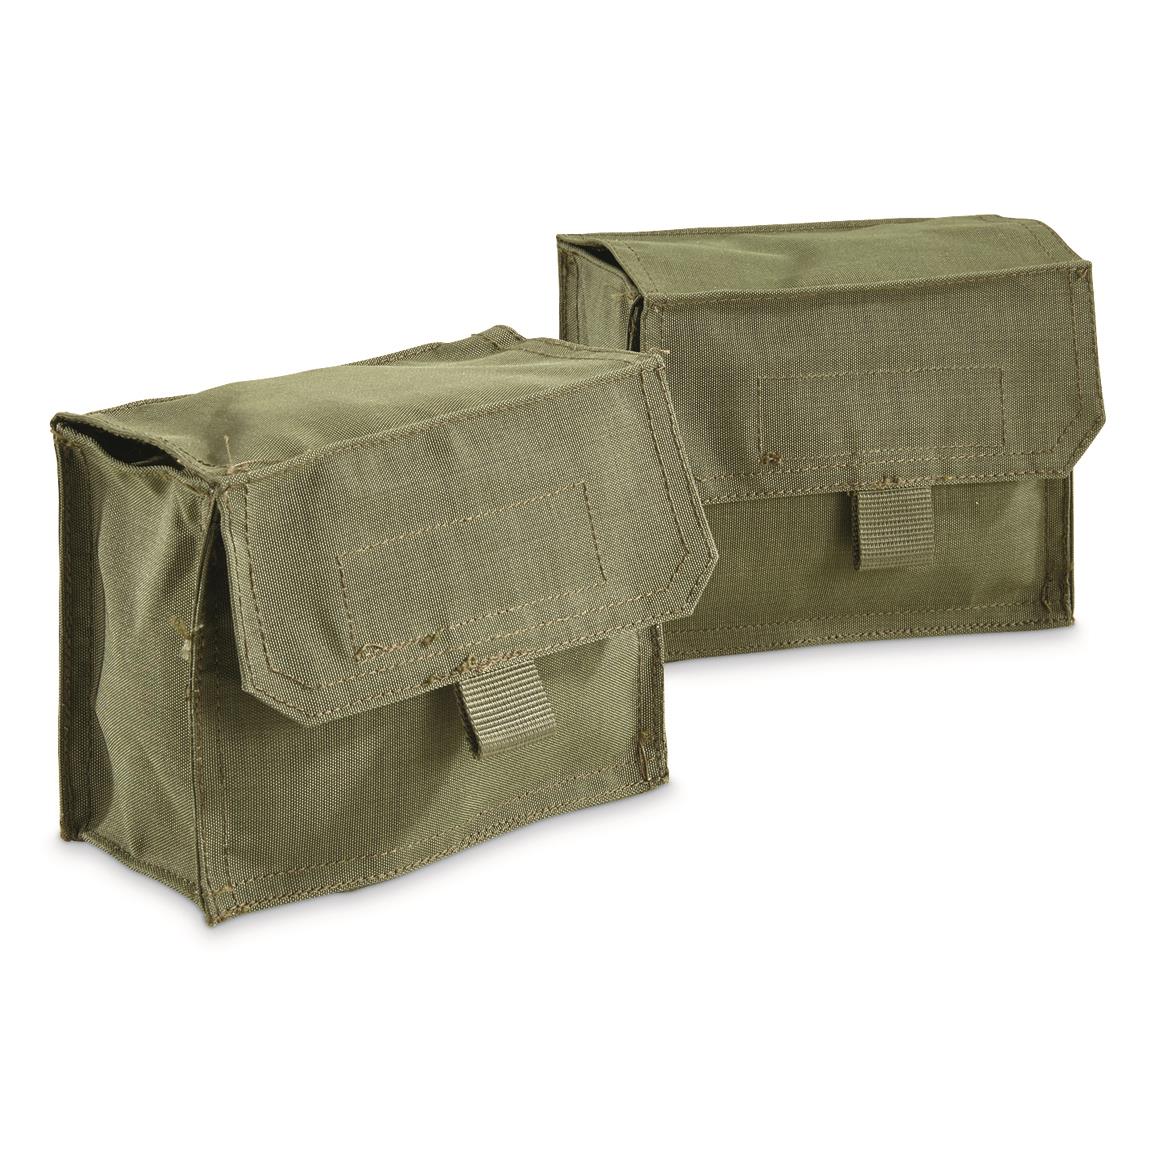 Italian Military Surplus Short Mag Pouches, 2 Pack, New